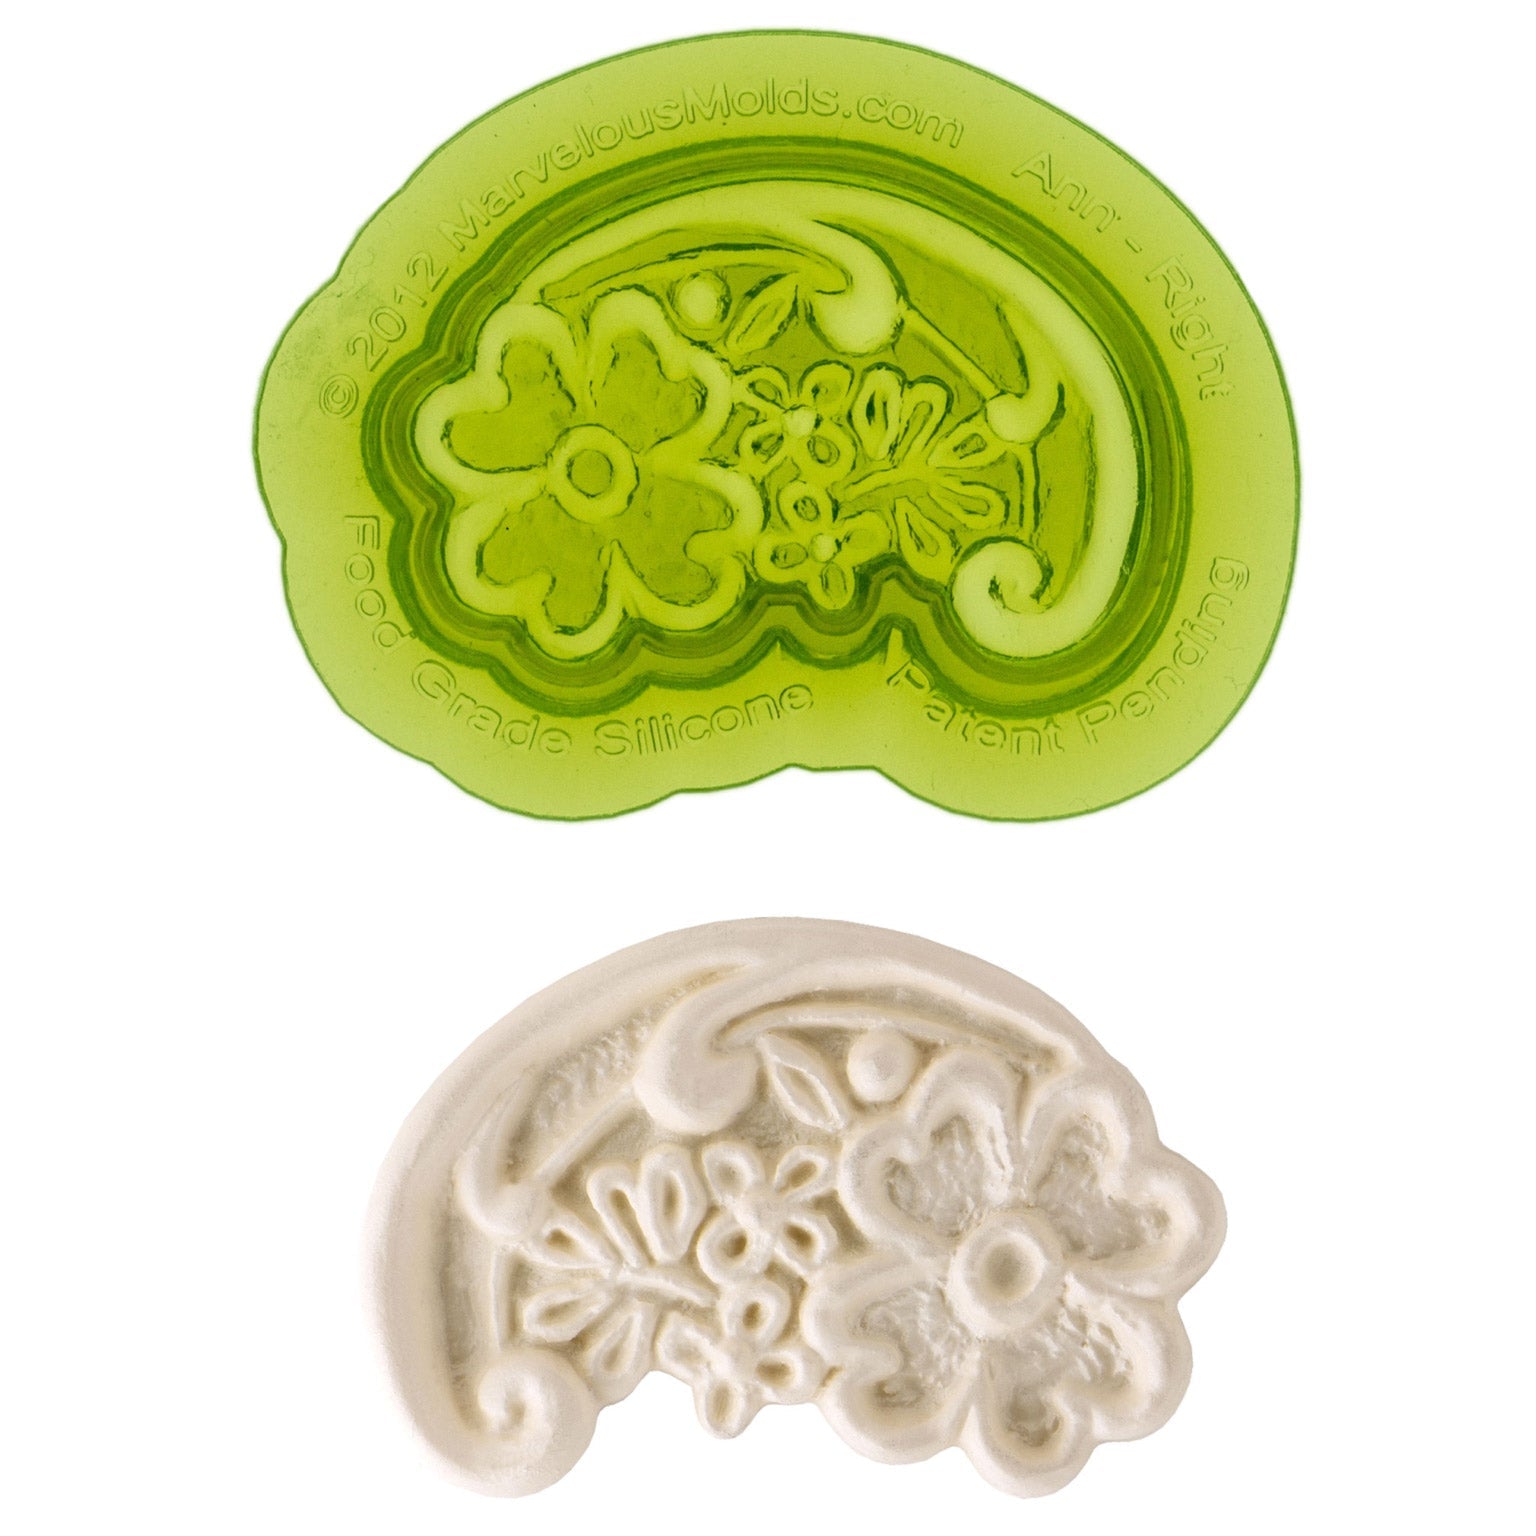 Silicone Baking Molds for sale in Wallace Landing, Louisiana